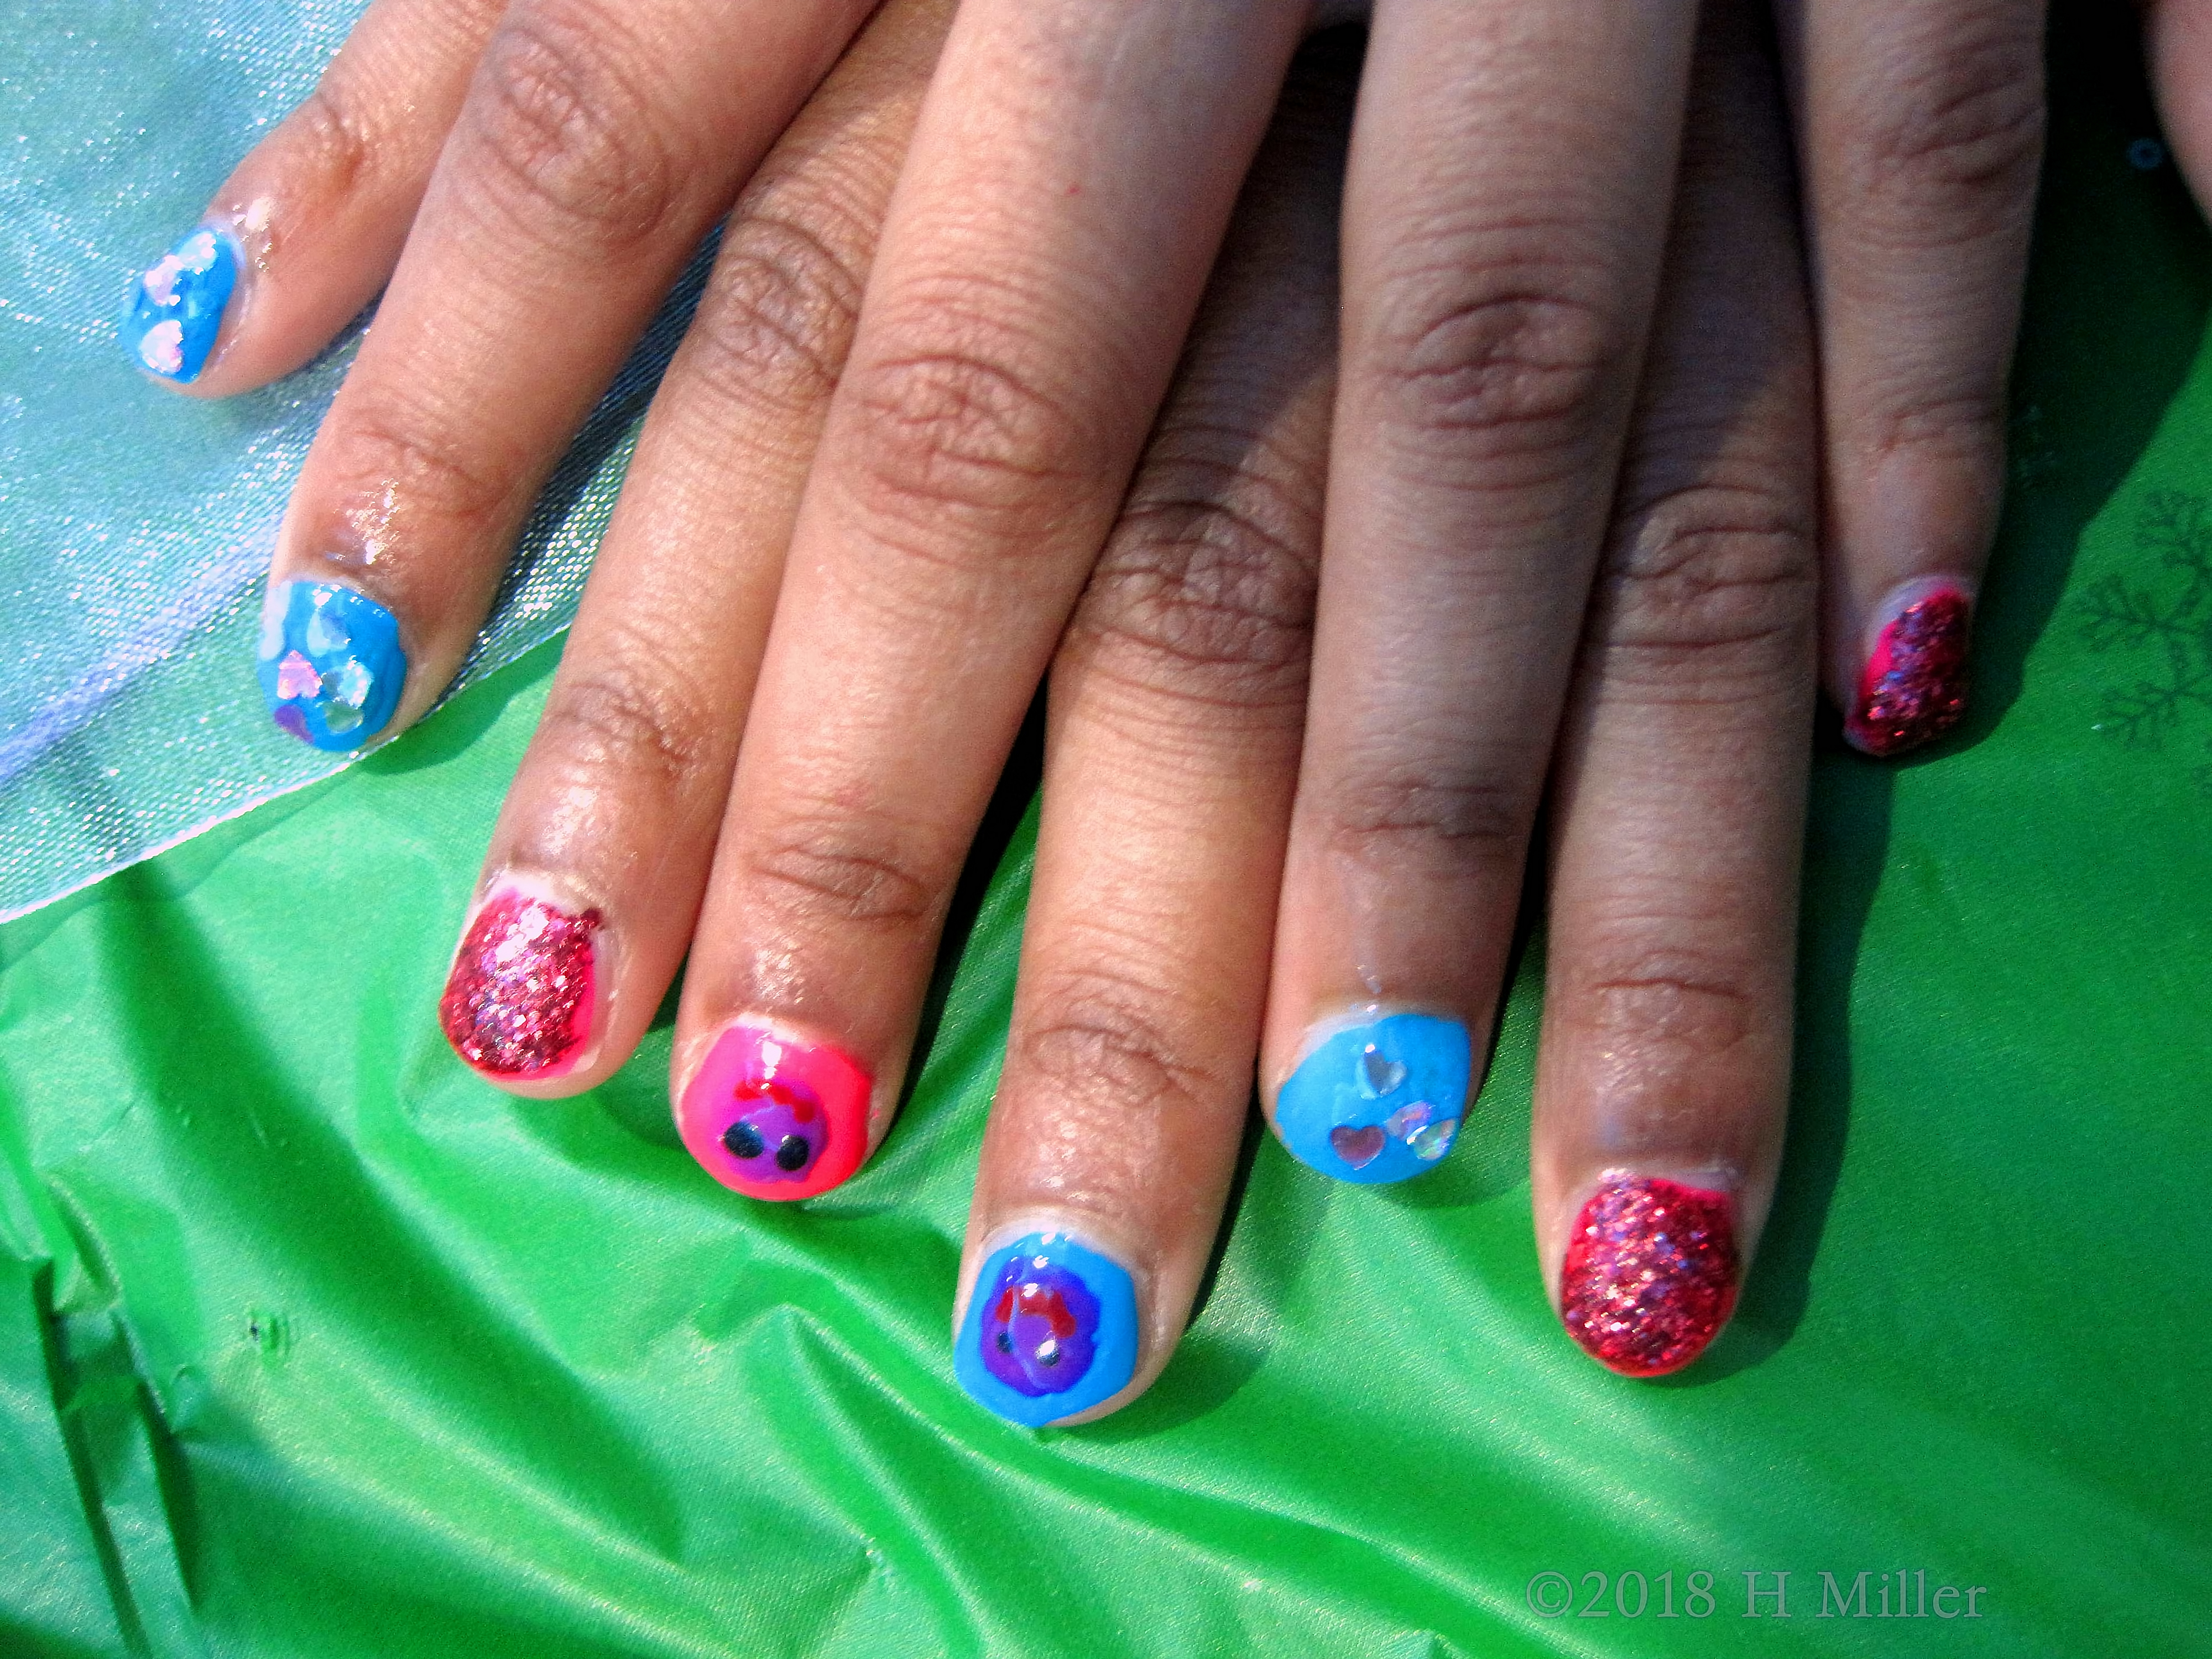 Check This Cool Kids Nail Art Out!